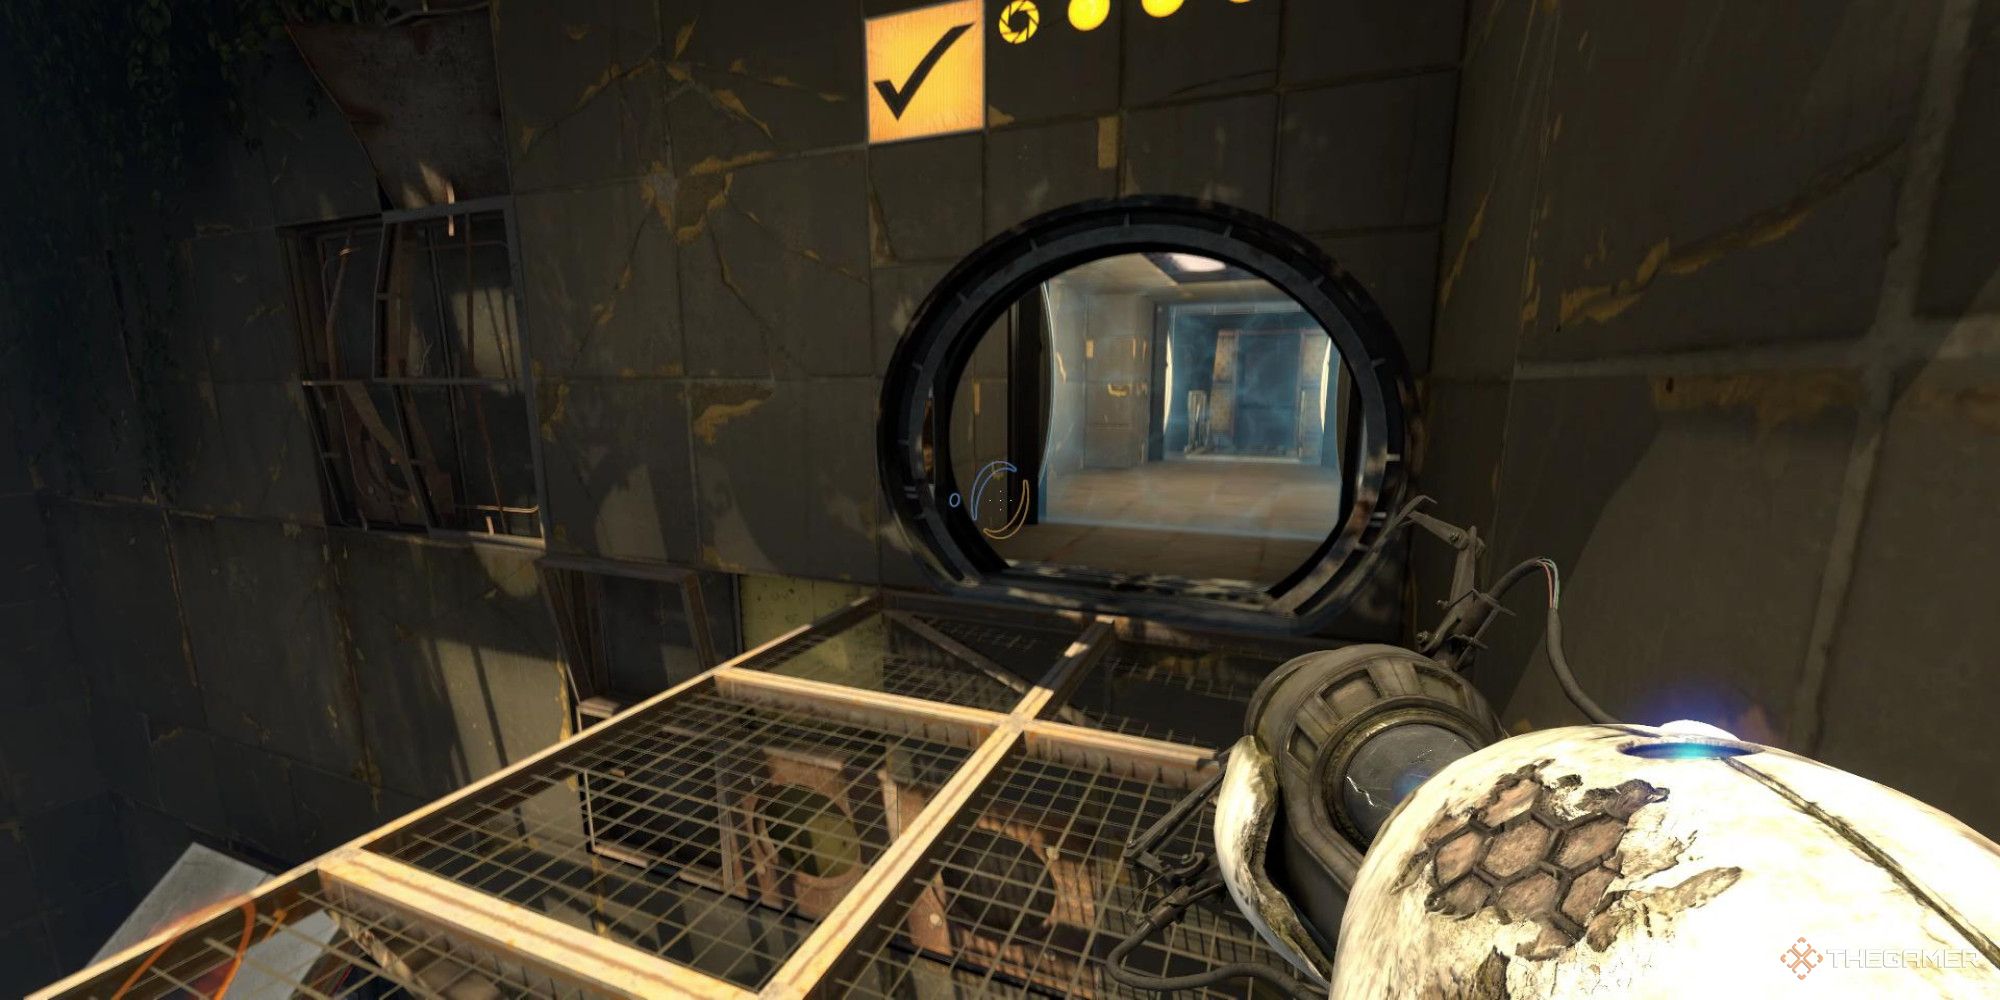 A screenshot from Portal Revolution showing the player character standing on a metal grated surface while looking towards an exit with an energy field past it.